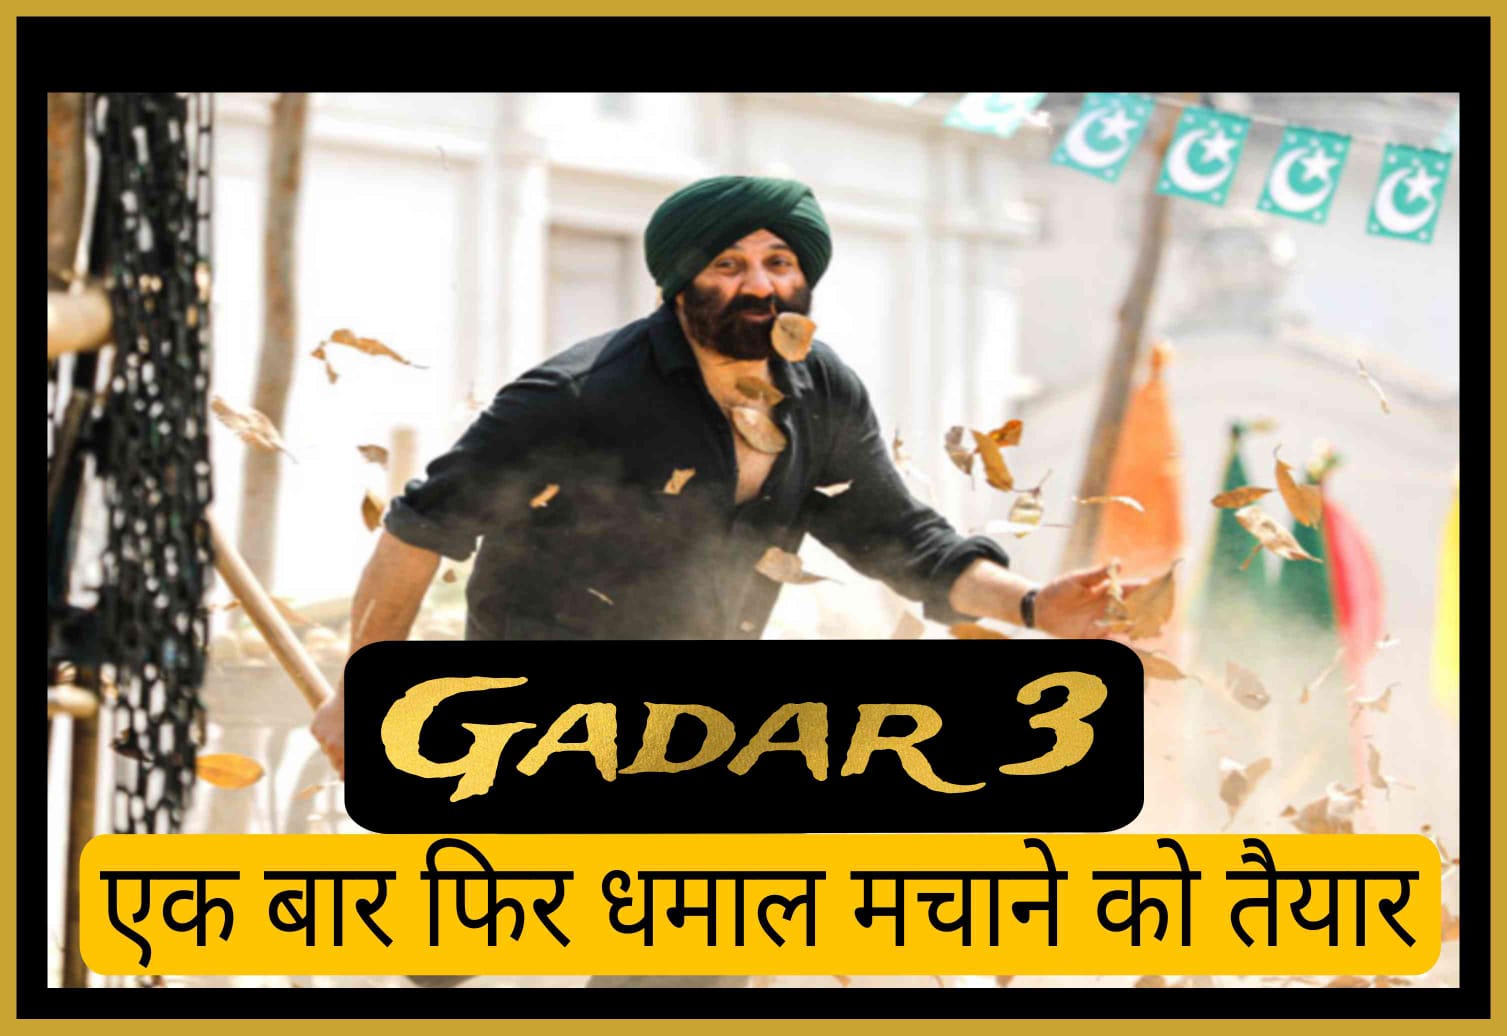 Big news about Ghadar 3, it will be released on this day.